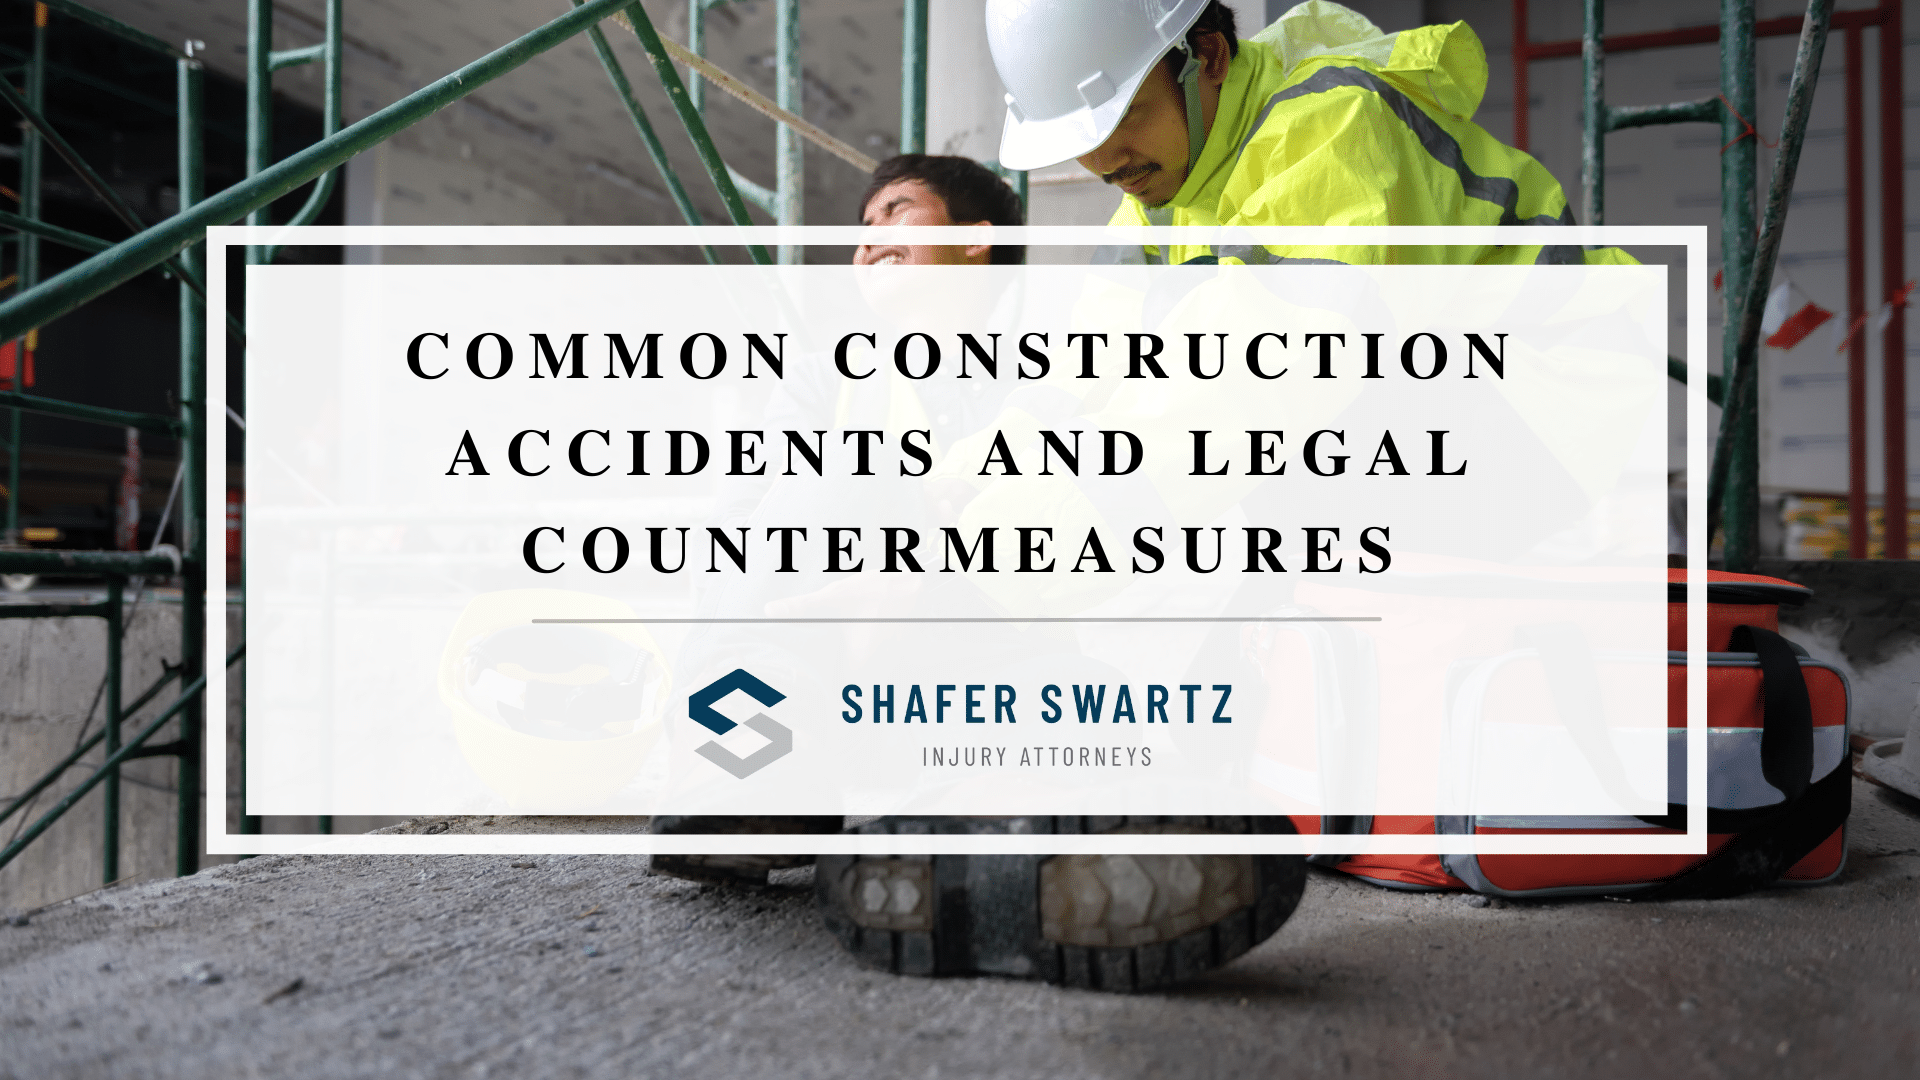 Common Construction Accidents and Legal Countermeasures